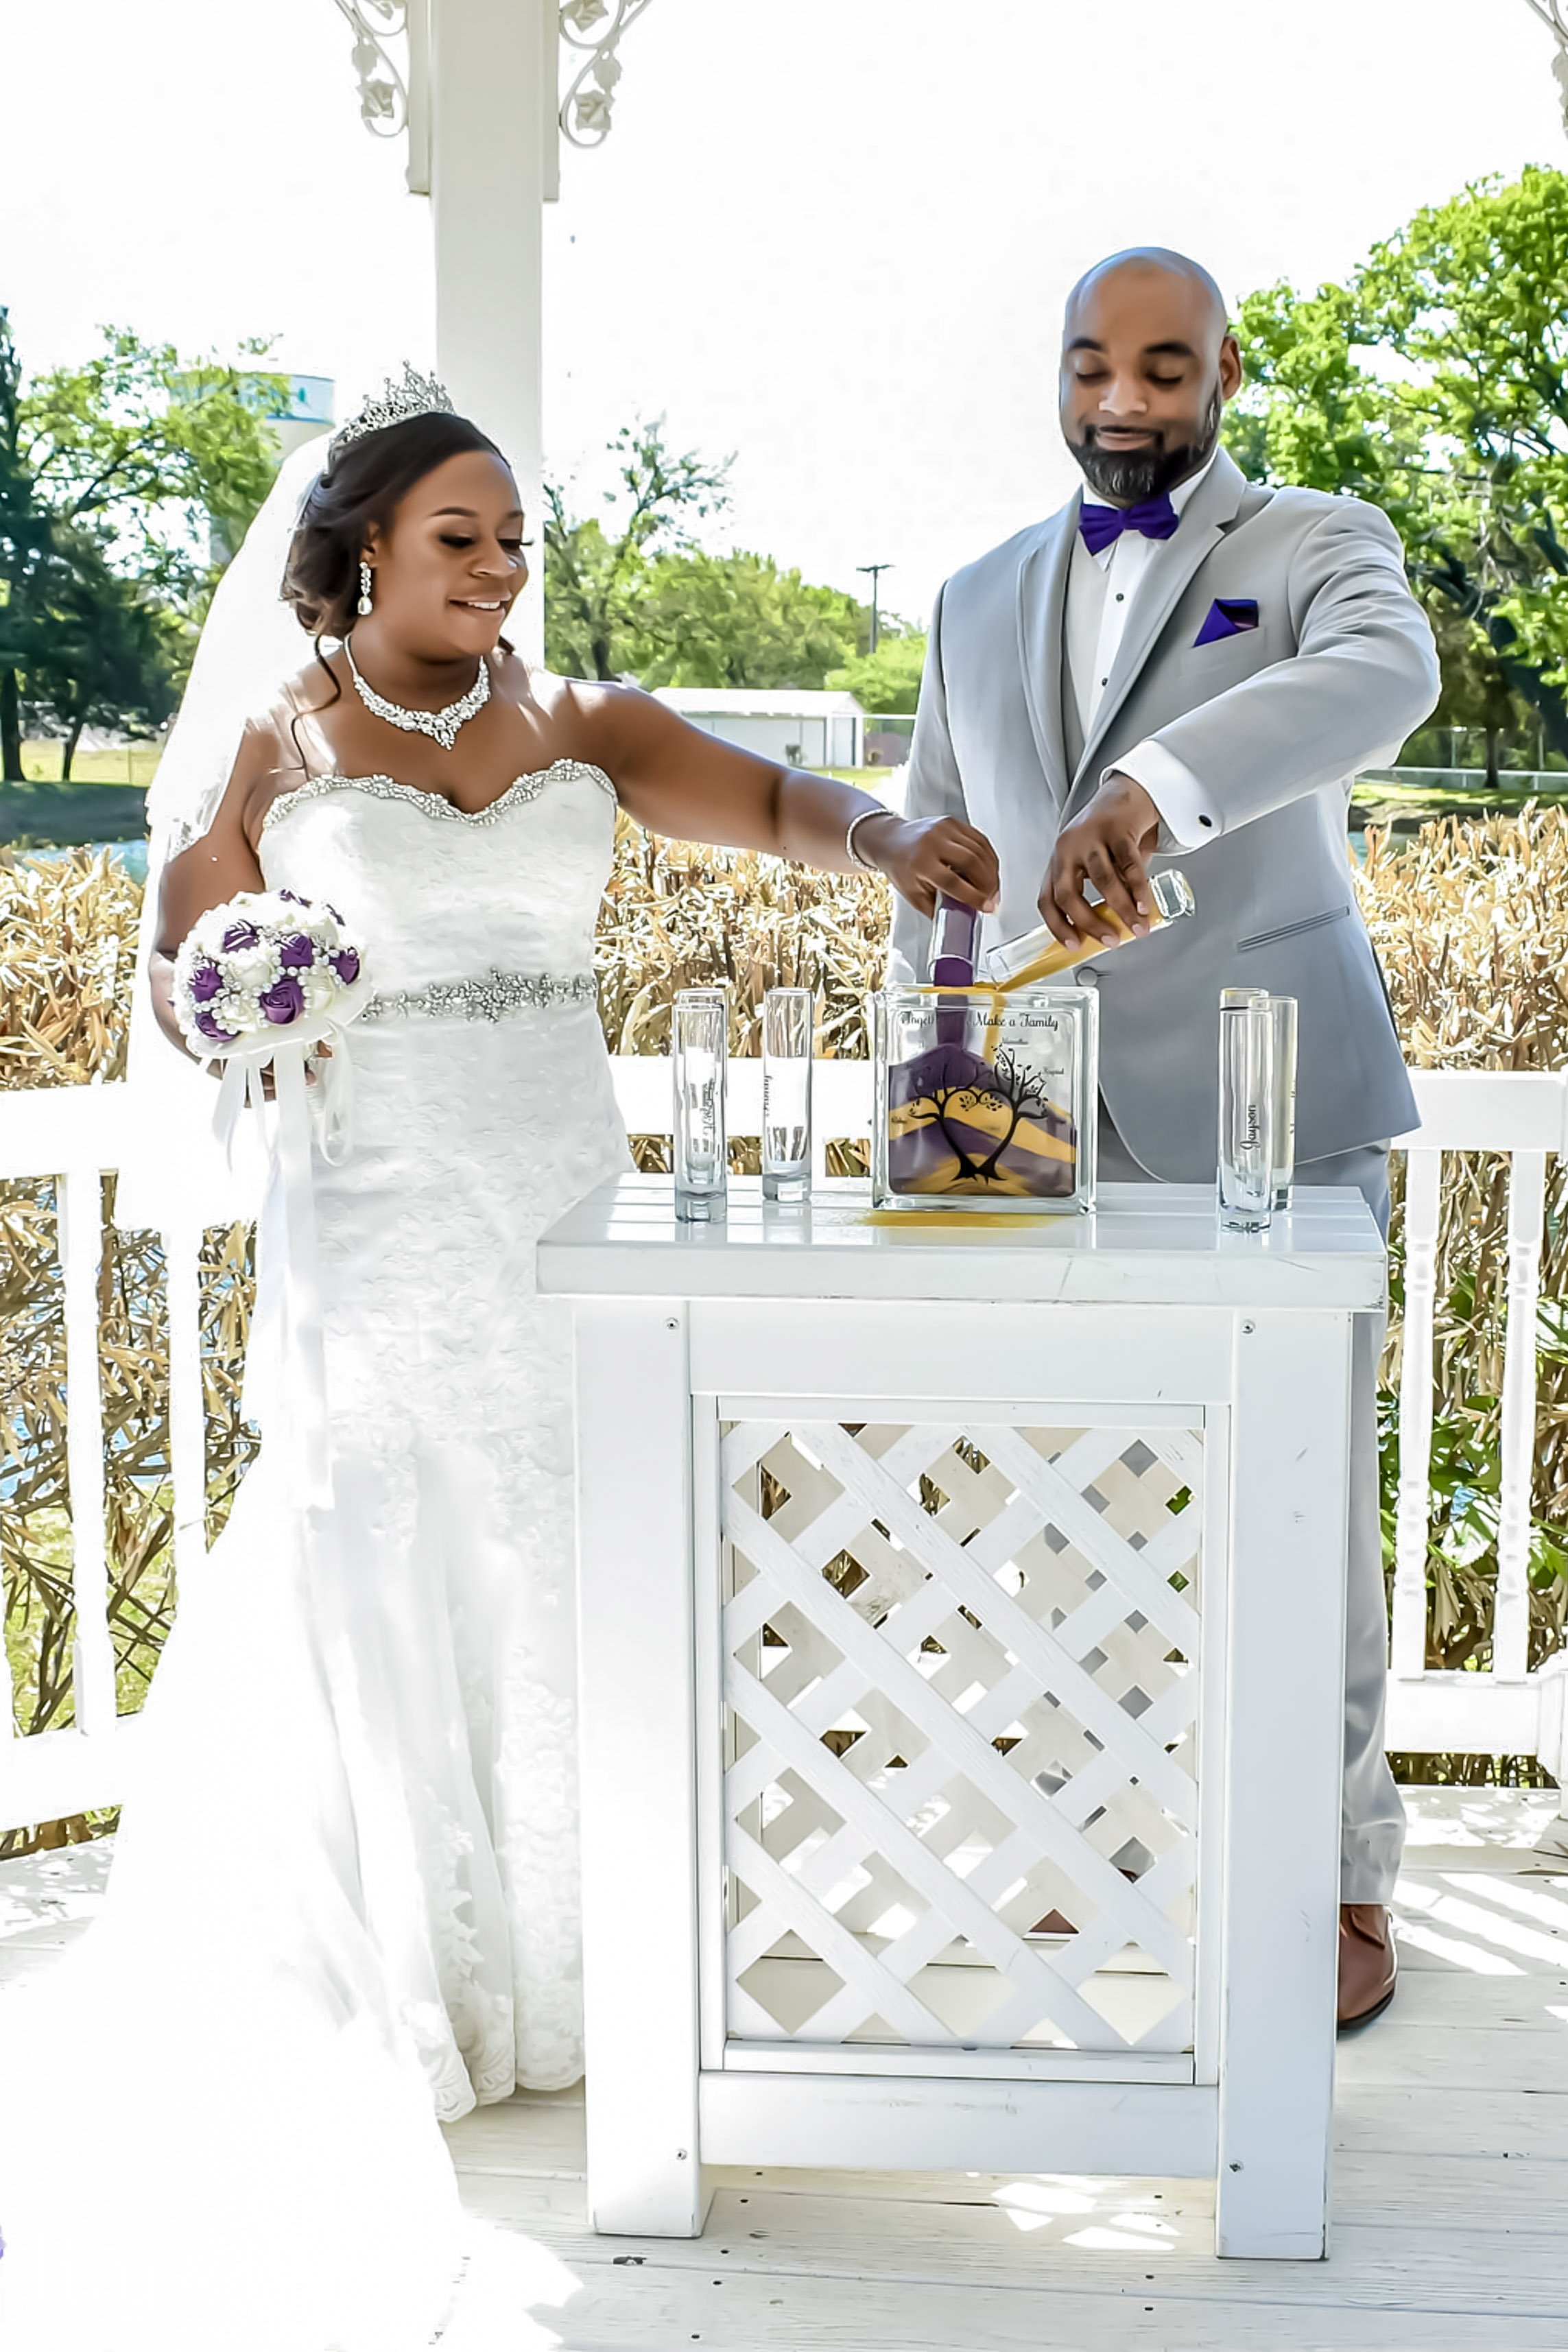 https://www.lilyandlime.com/images/uploads/blog-galleries/2023_Blogs/230221/Black_American_Wedding_Traditions_to_Incorporate_Into_Your_Special_Day_2-21-2023_017.jpg